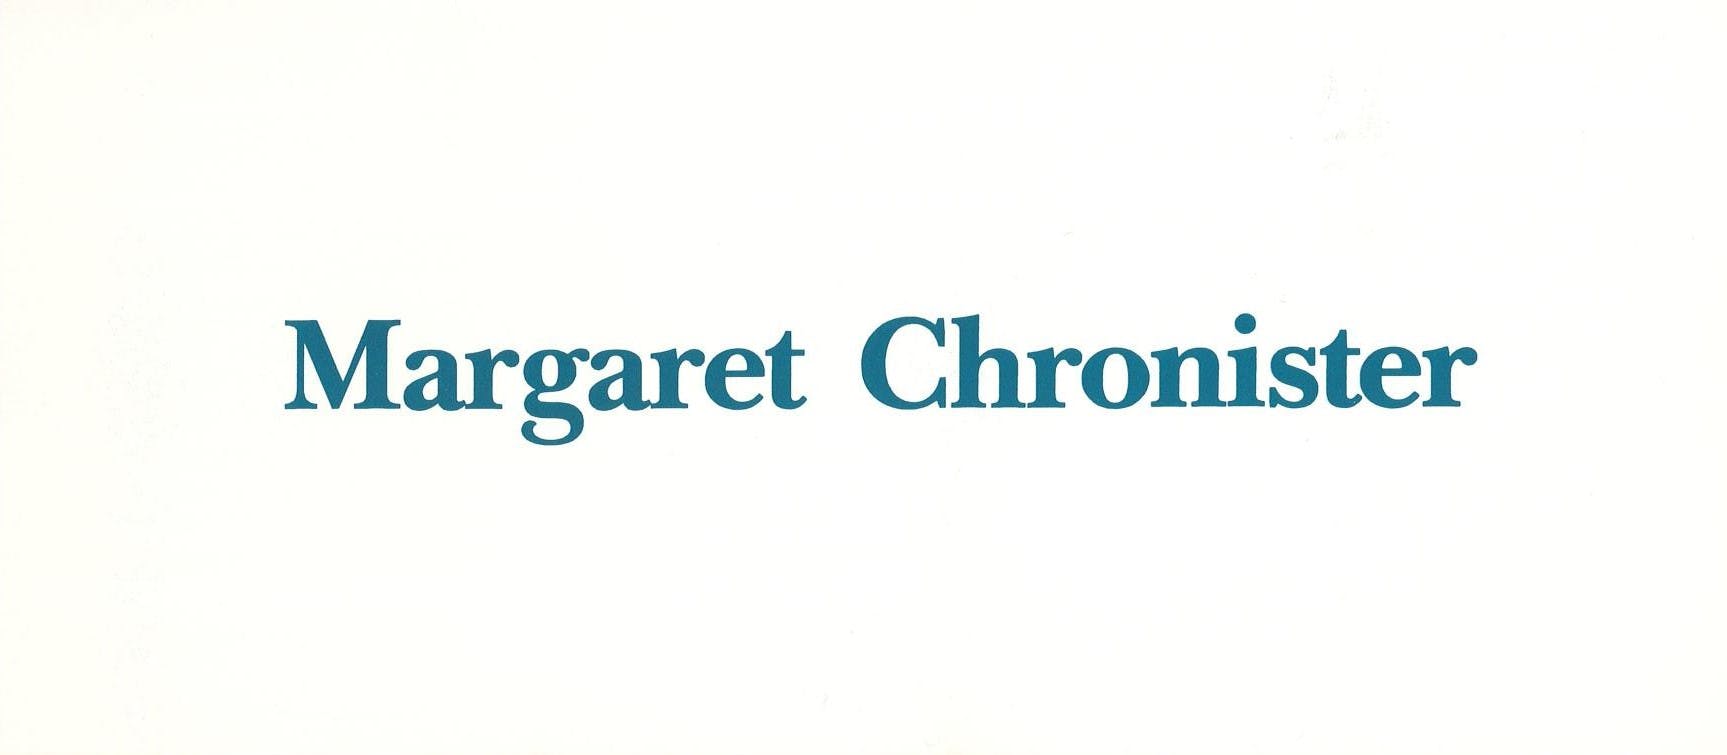 A thin horizontal image which contains blue text that says “Margaret Chronister” on a stark white background. 